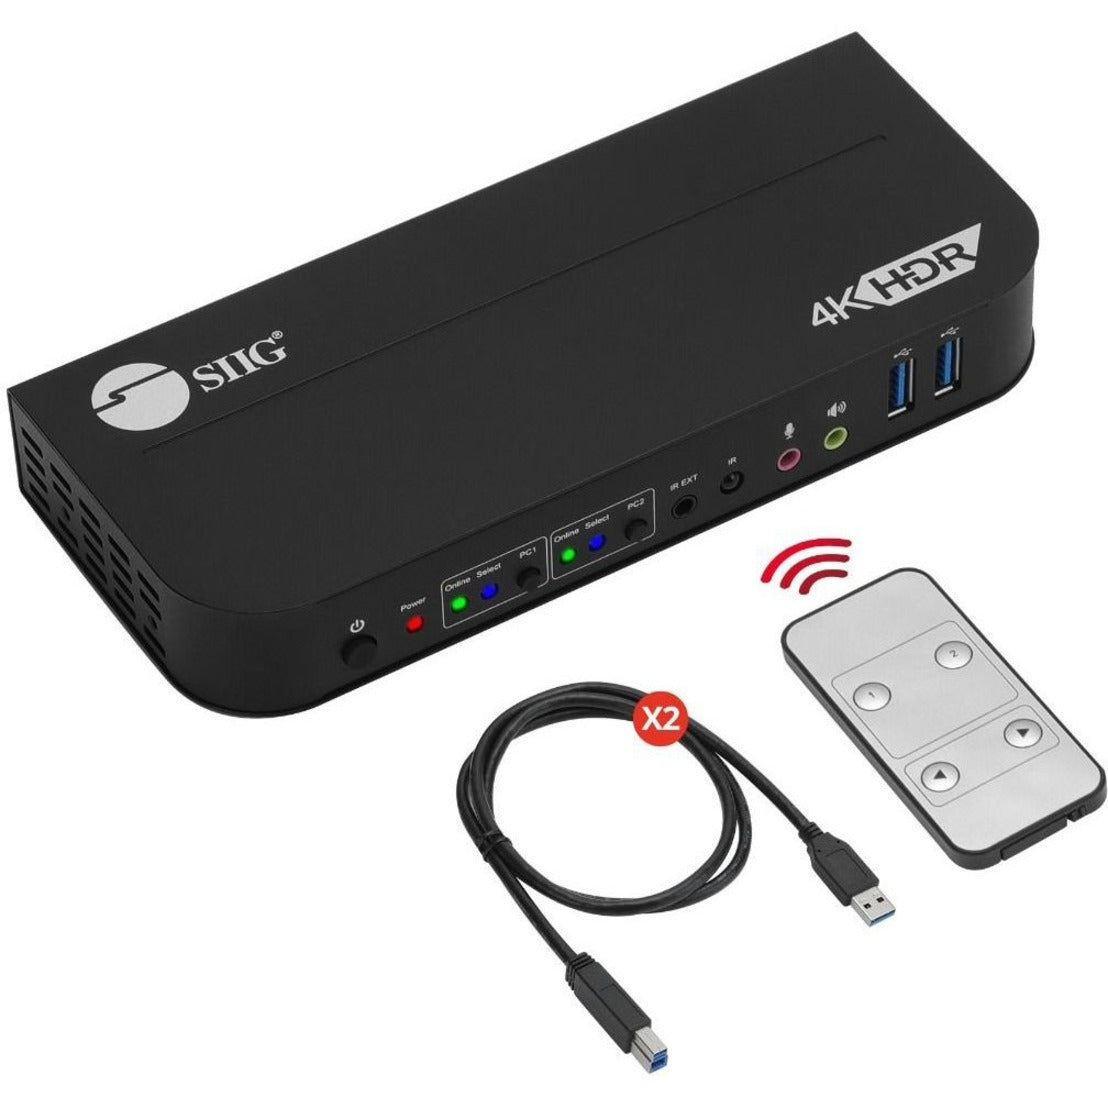 SIIG CE-KV0E11-S1 2x1 HDMI 4K HDR KVM USB 3.0 Switch with Remote Control Plug and Play Marca: SIIG Traducción: 2x1 HDMI 4K HDR KVM USB 3.0 Interruptor con Control Remoto Conectar y Usar